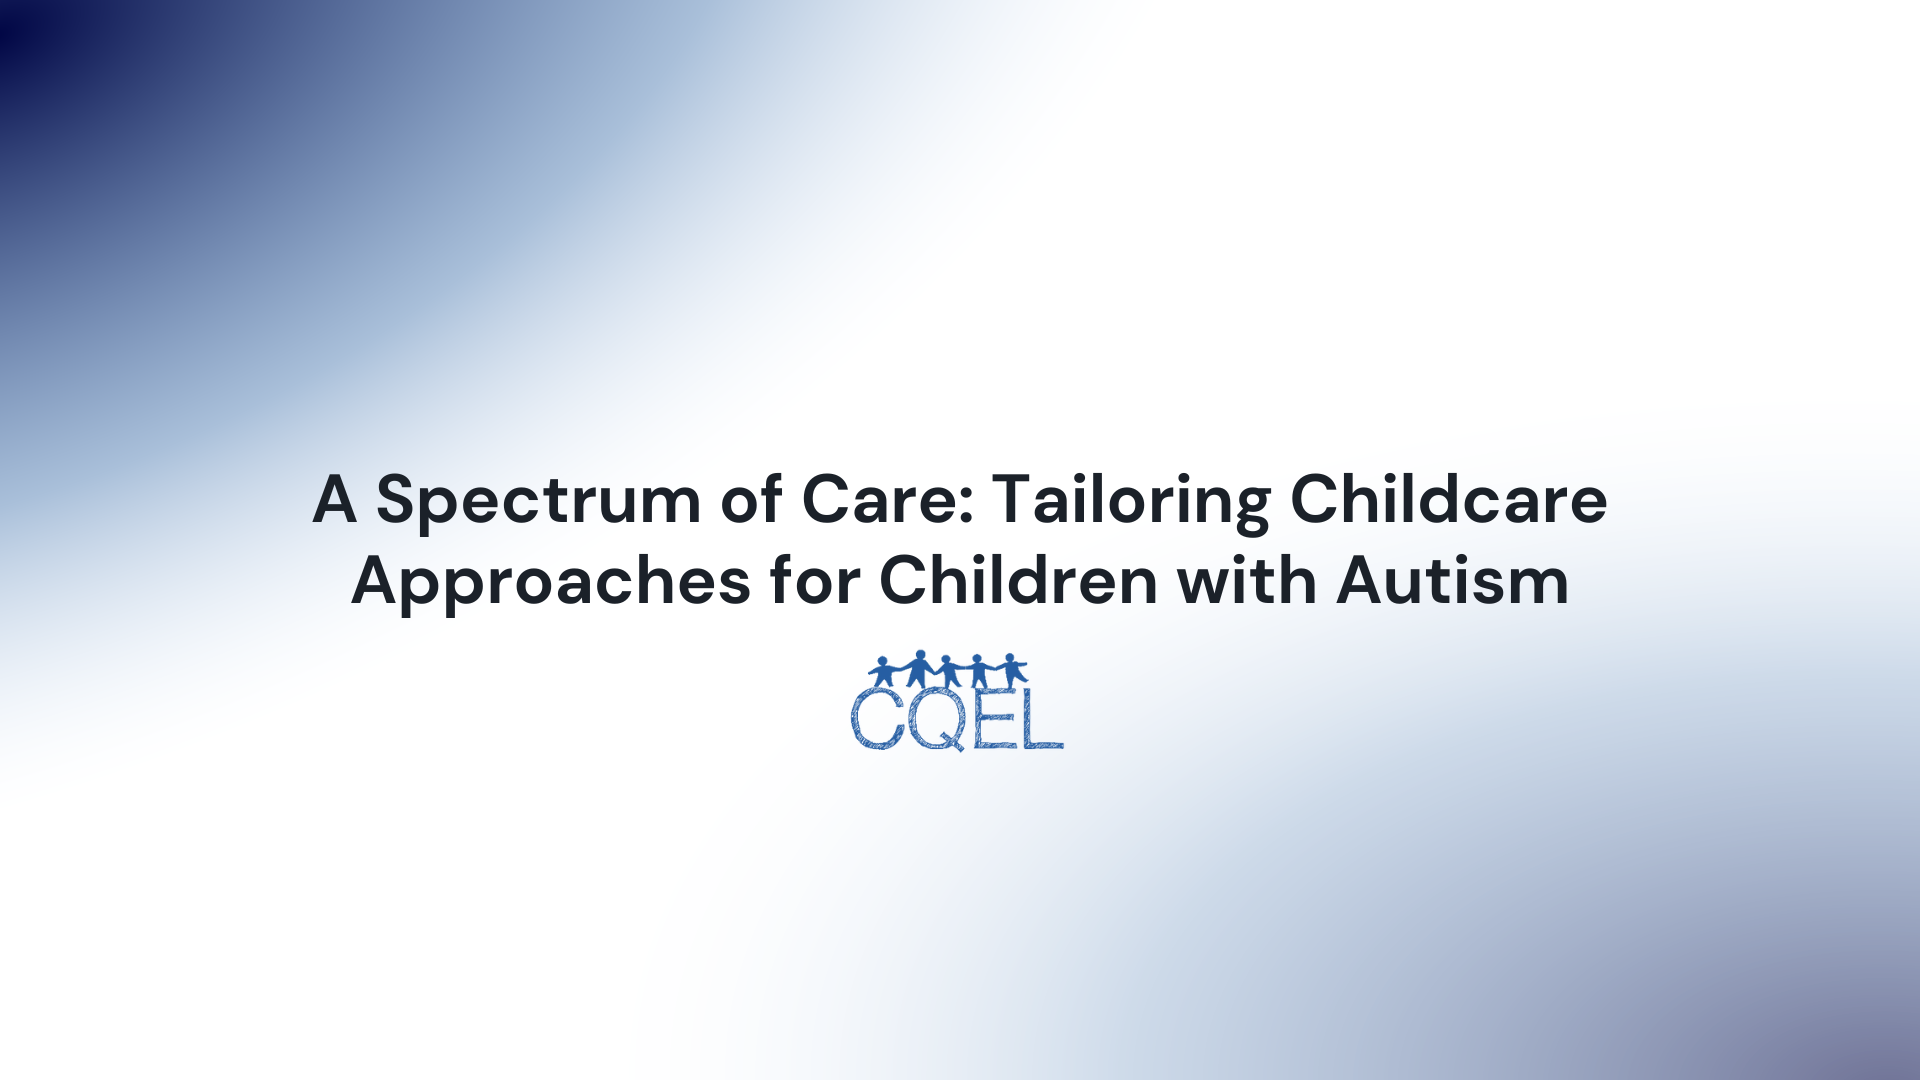 A Spectrum of Care: Tailoring Childcare Approaches for Children with Autism